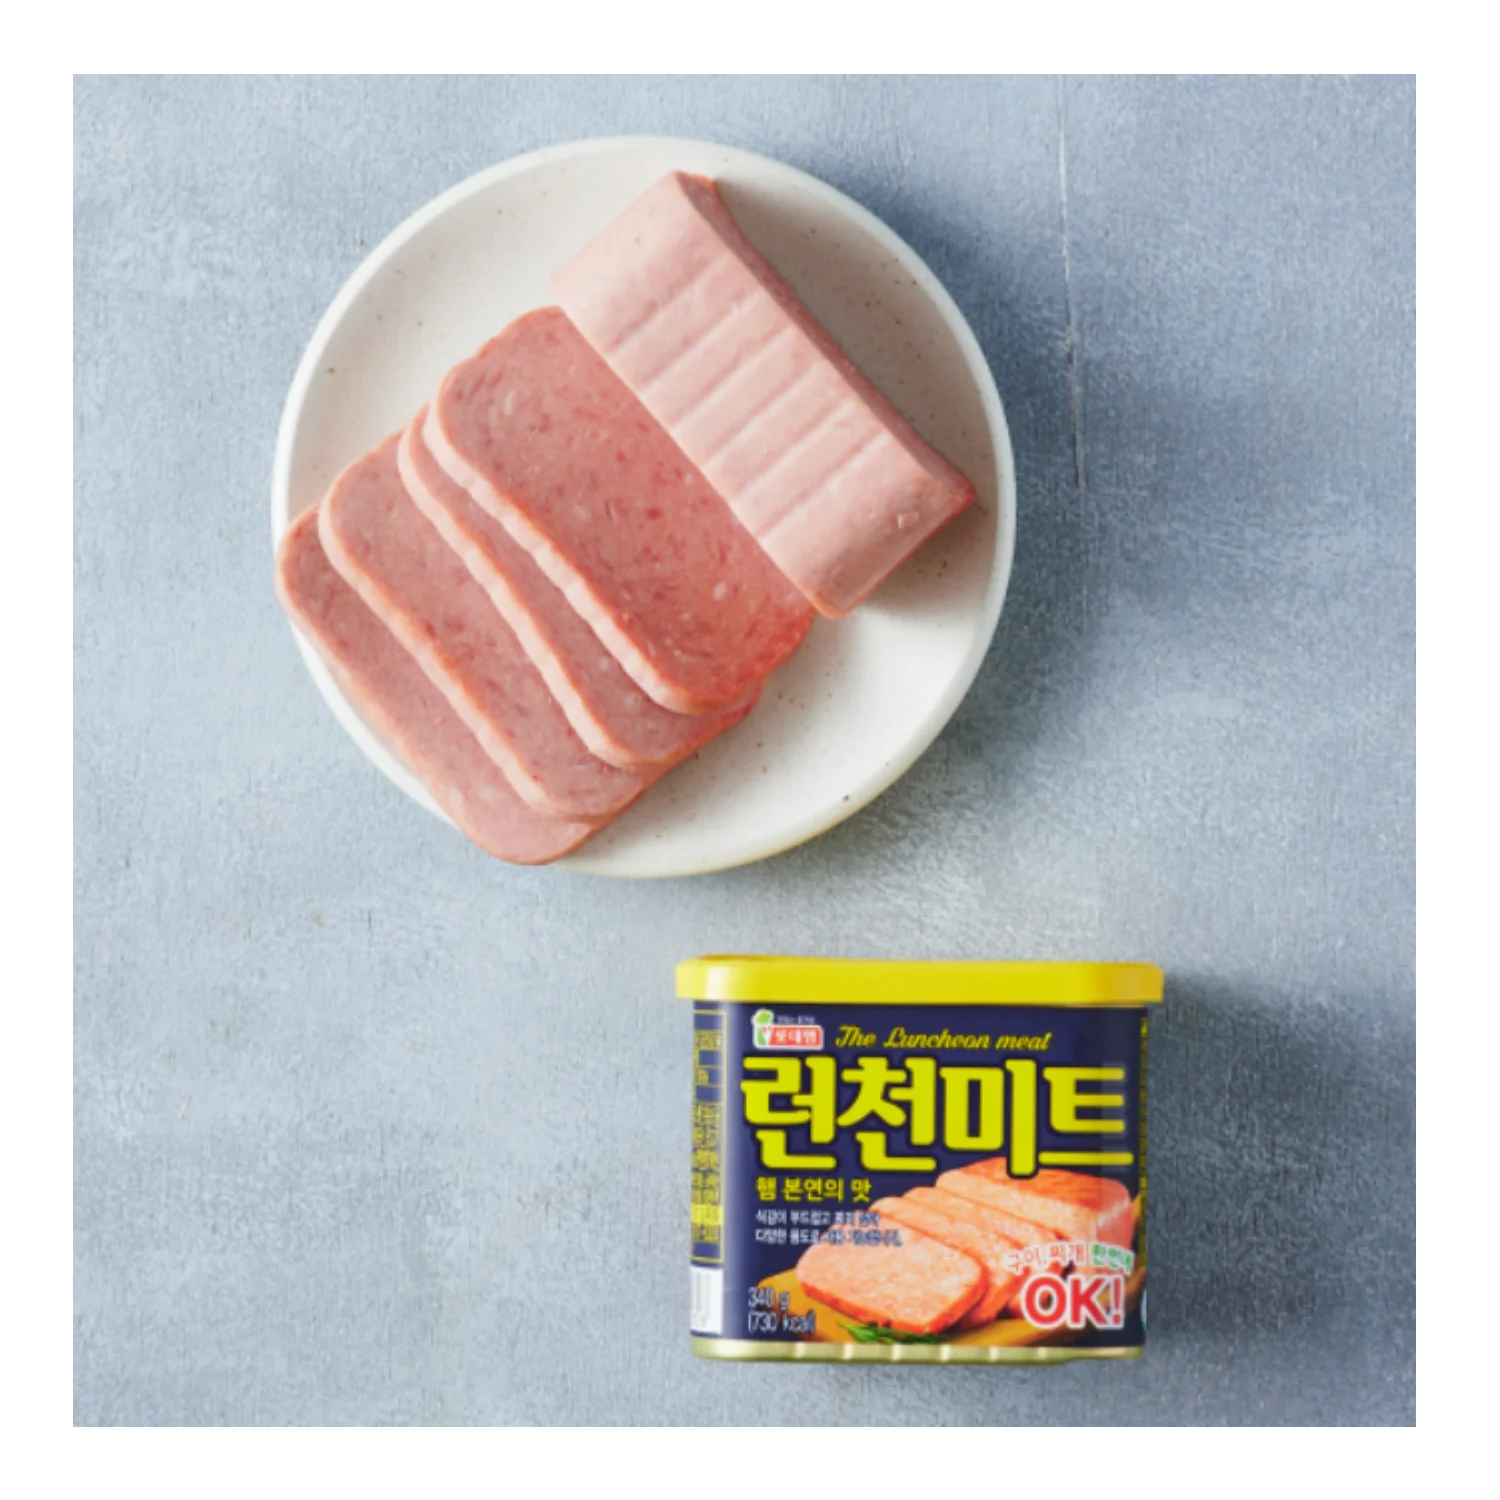 
Canned meat Lotte foods Luncheon meat 340g pork luncheon meat canned Korea brands 